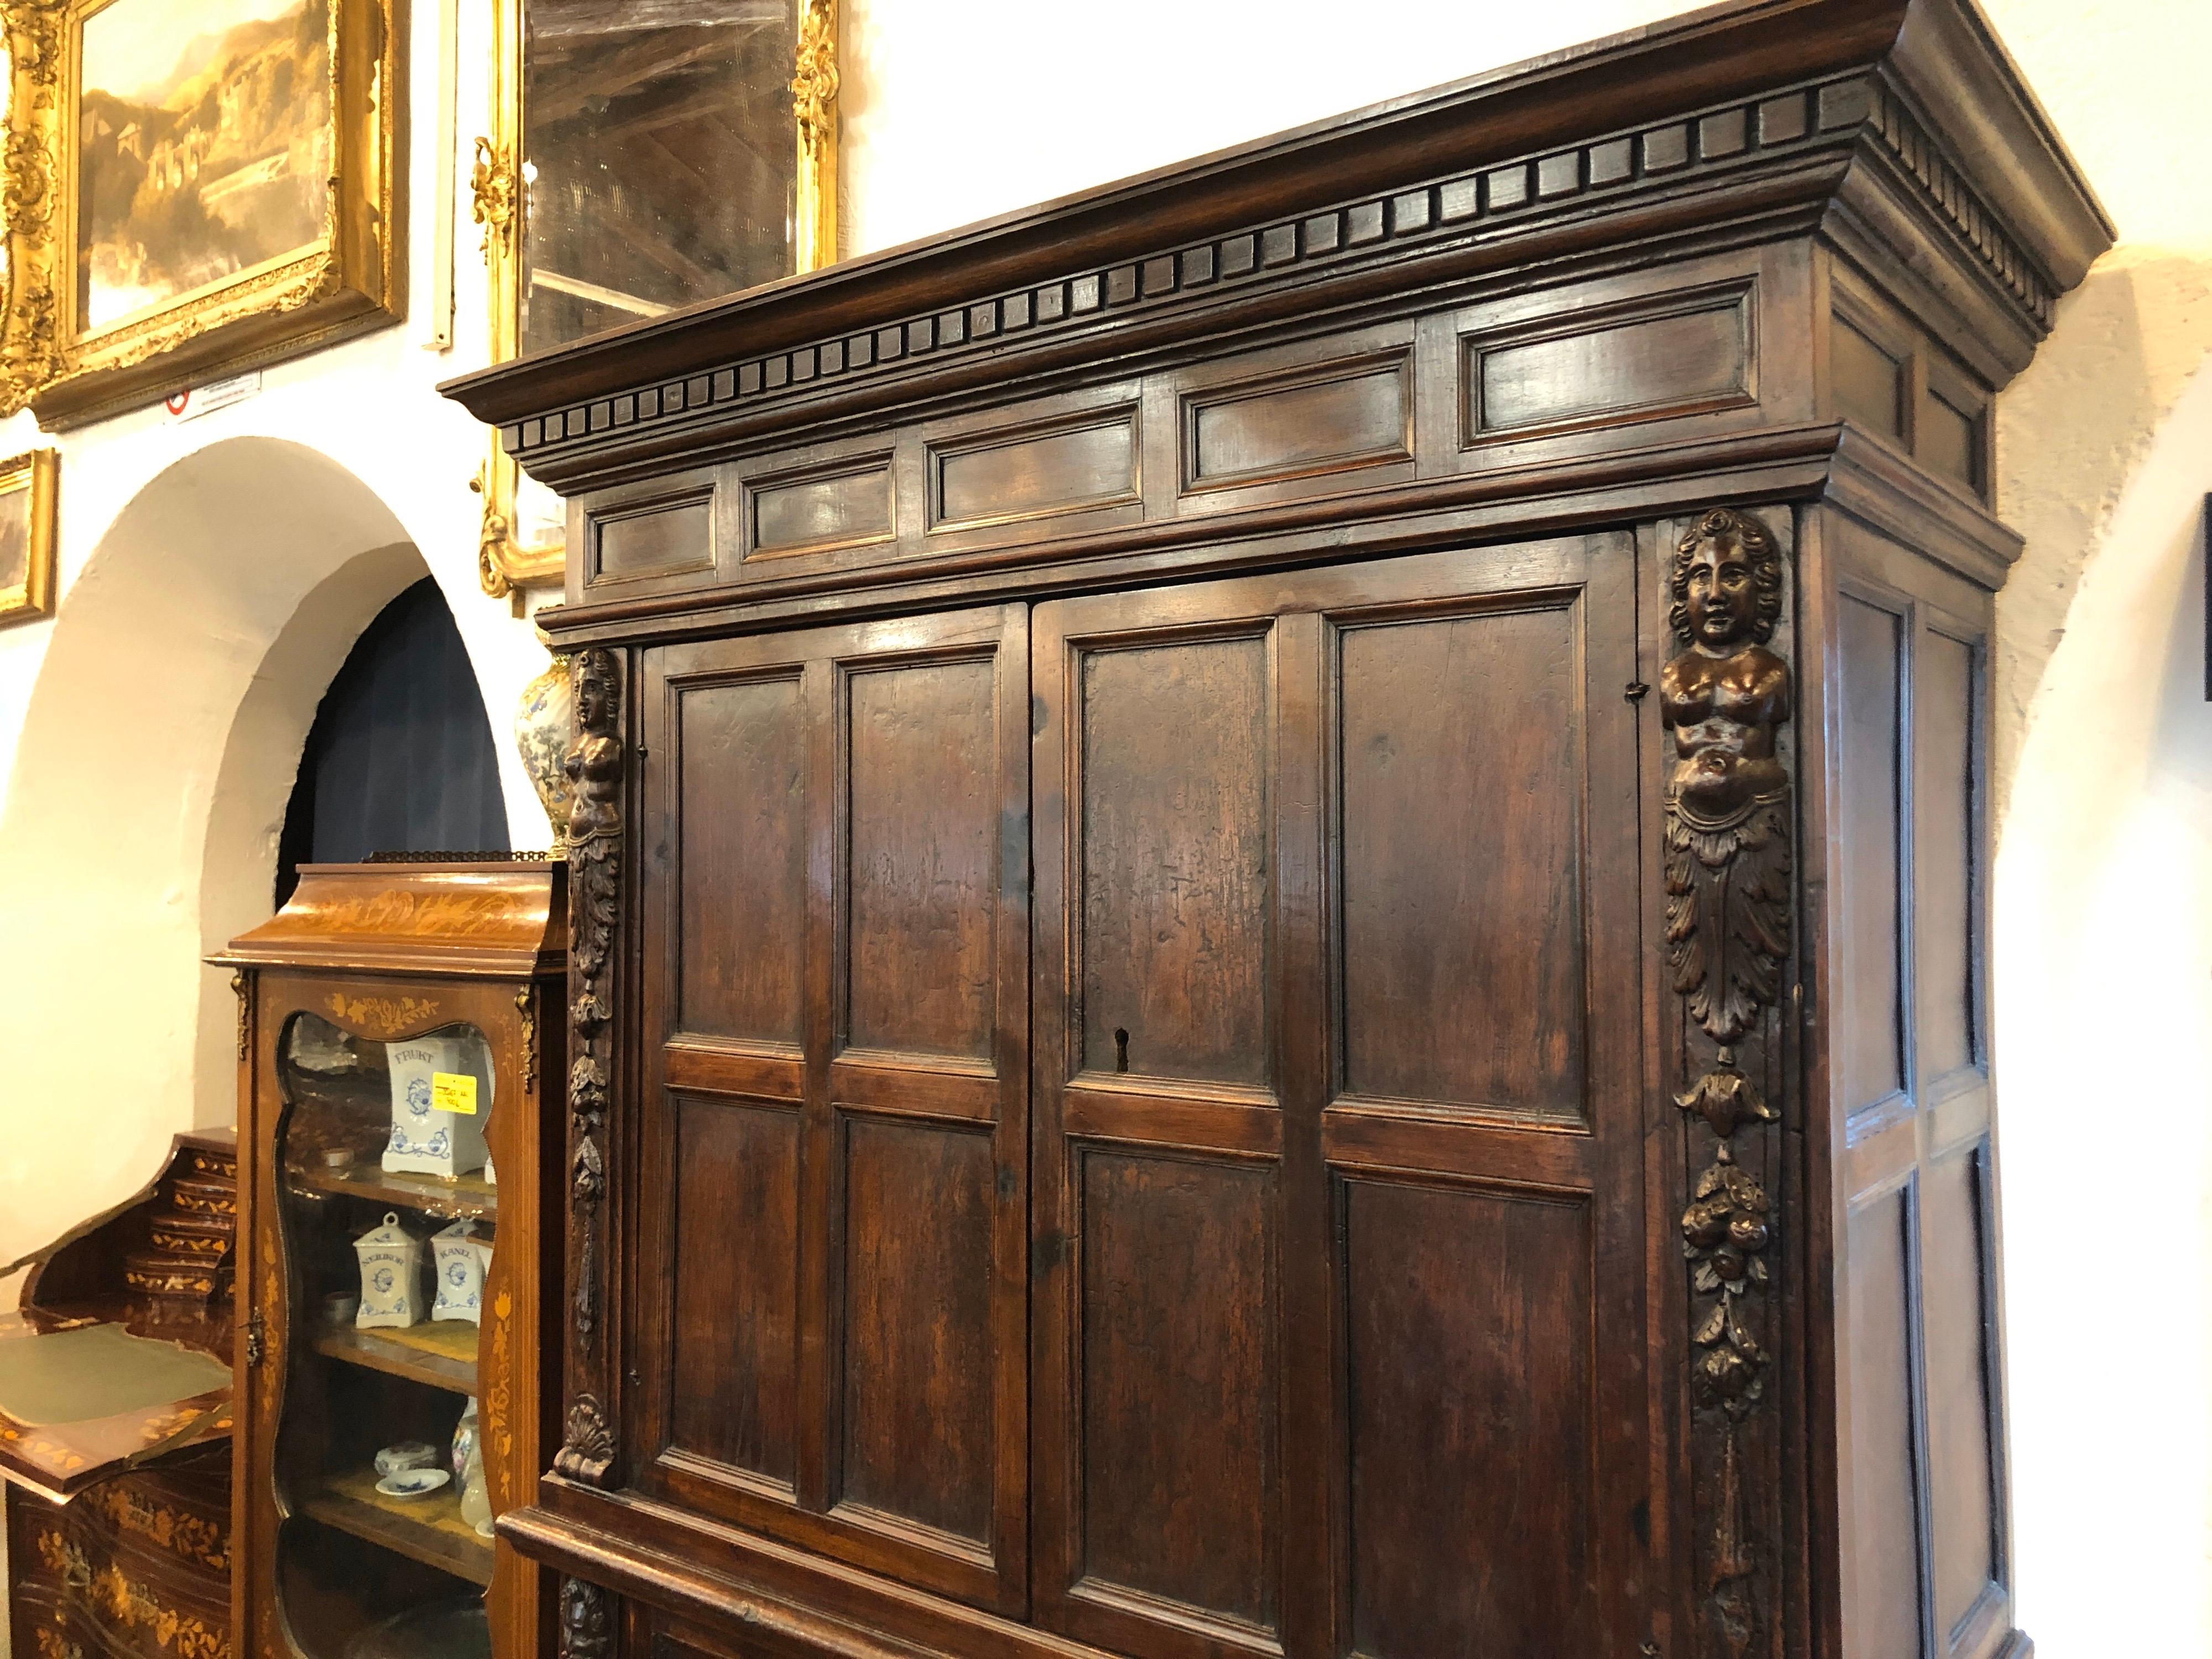 Double body Italian credenzas, Renaissance period, circa 1580 , Tuscany area, walnut wood, finely carved on the uprights with figures of men and women, completely original and in excellent state of preservation. Only on the rear lining was a piece